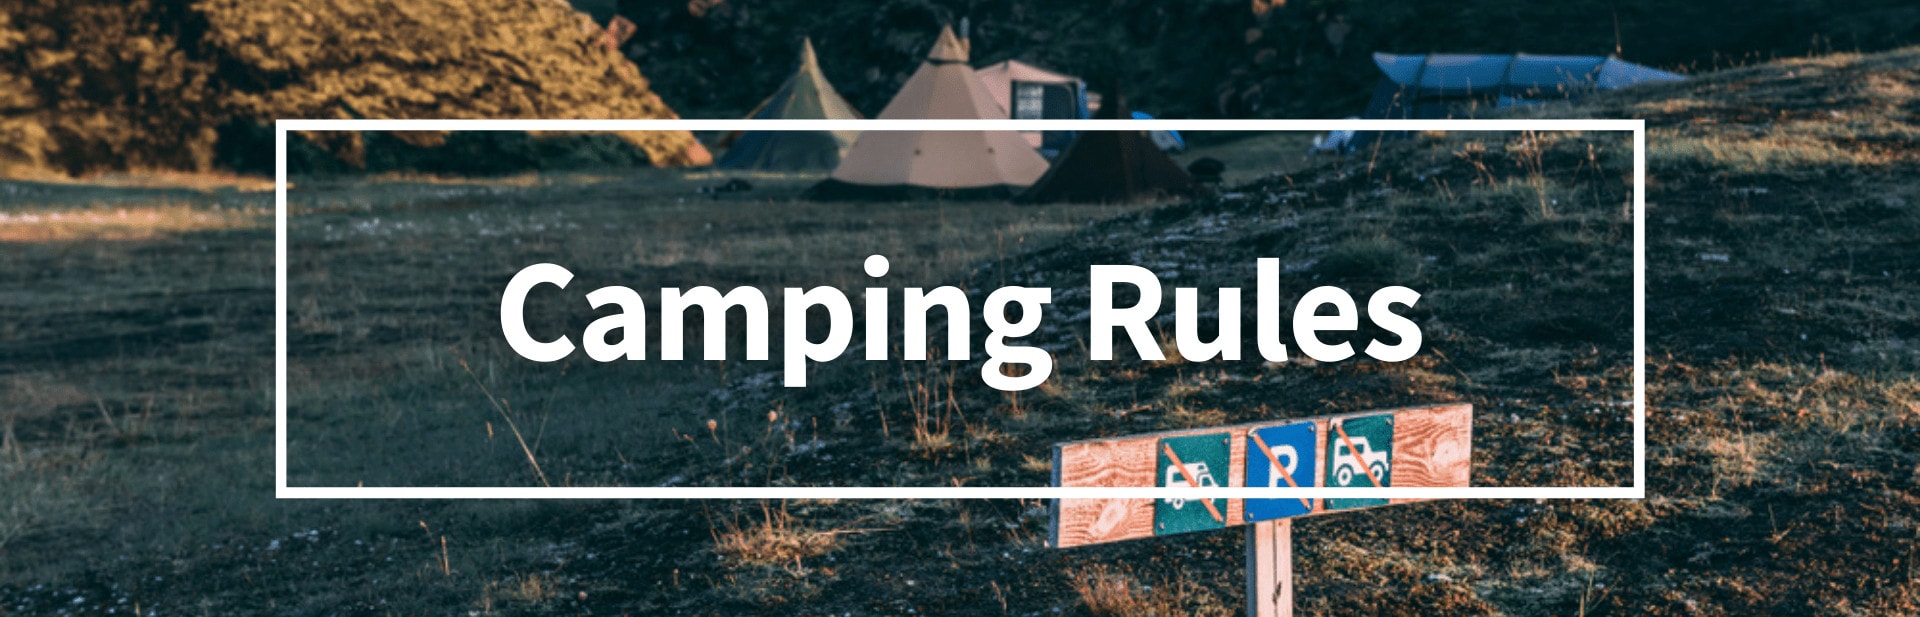 Camping Rules: Does Camping Have Unwritten Rules?